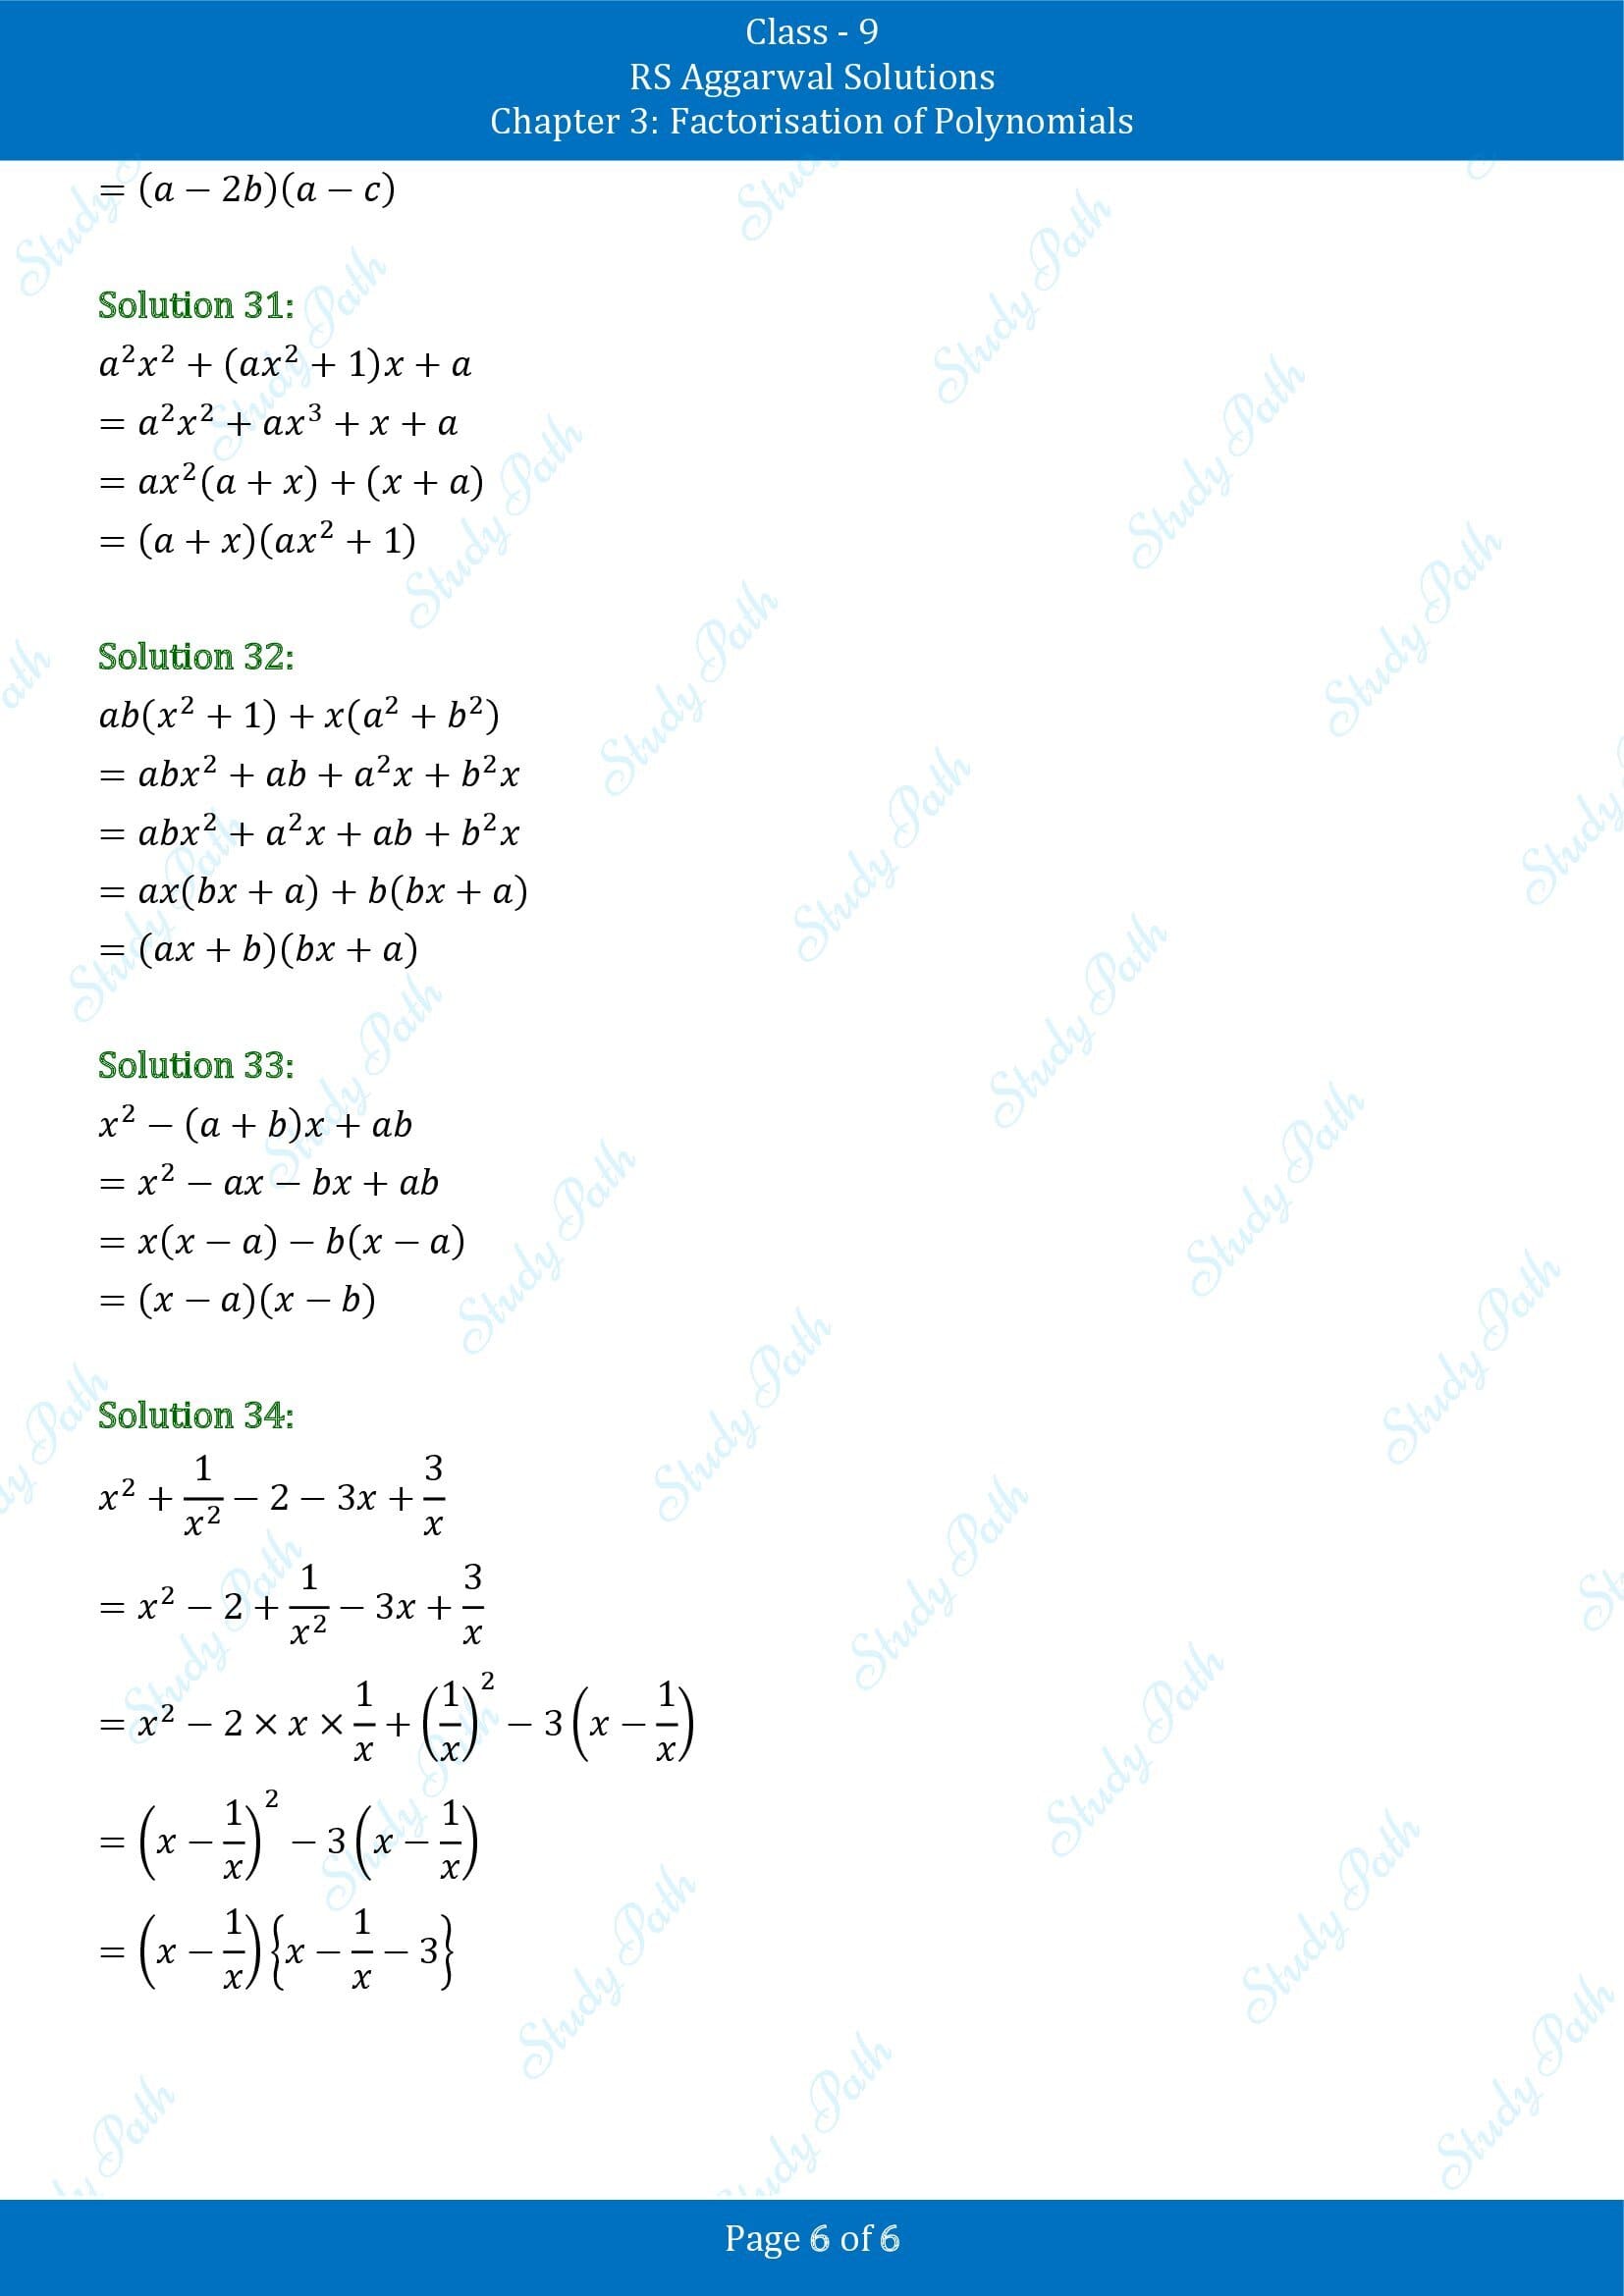 RS Aggarwal Solutions Class 9 Chapter 3 Factorisation of Polynomials Exercise 3A 00006